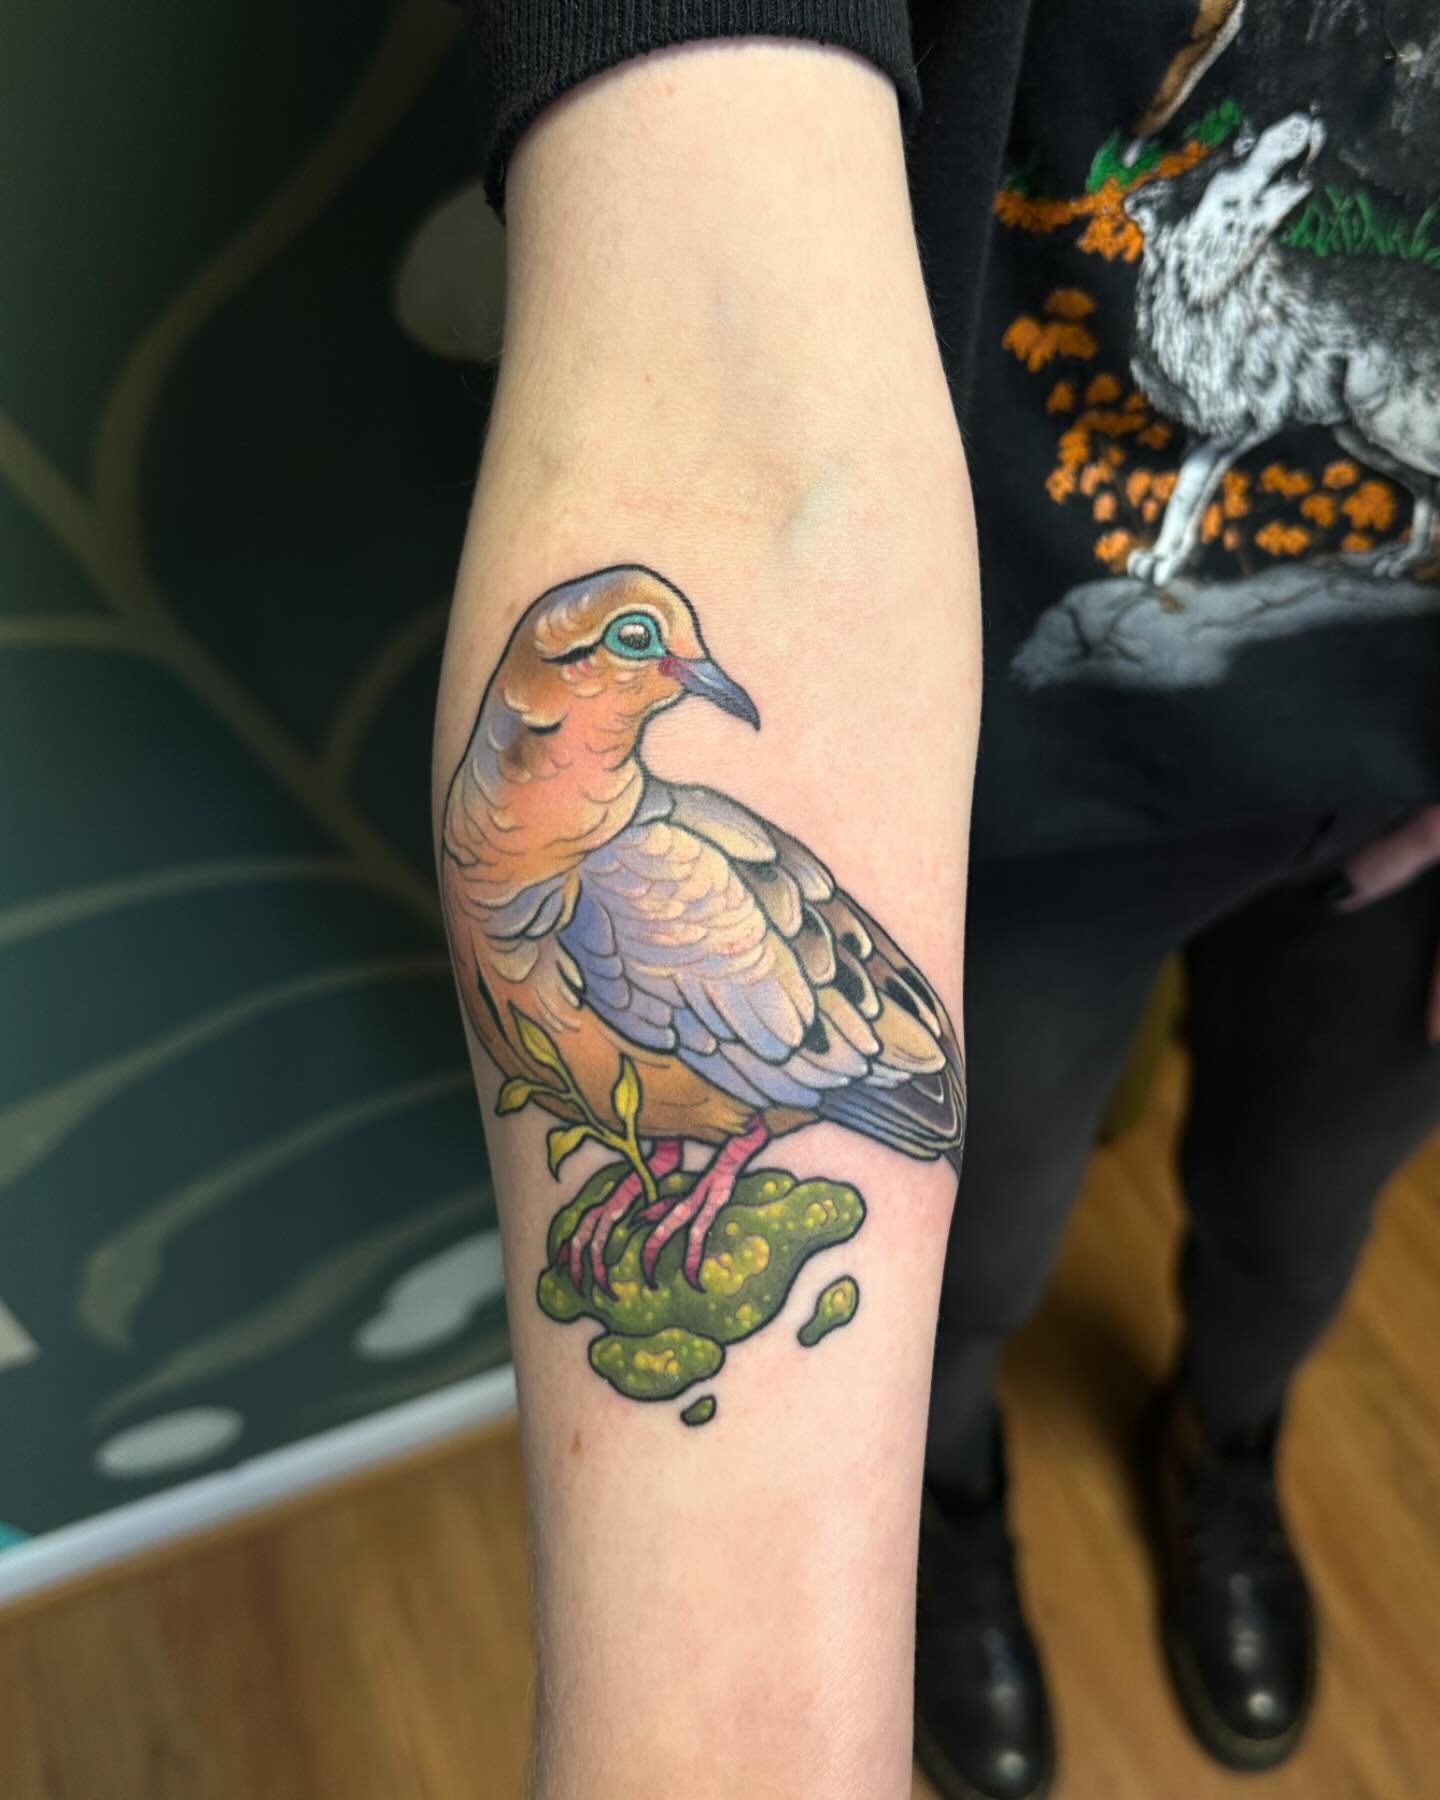 Mourning dove for the lovely Noelle✨
(Lines and moss are healed in this shot, other colors fresh)
.
.
.
#Tattoo #ladytattooers #ohiotattooers #columbustattooers #whiteraventattoostudio #mourningdove #dovetattoo #birdtattoo